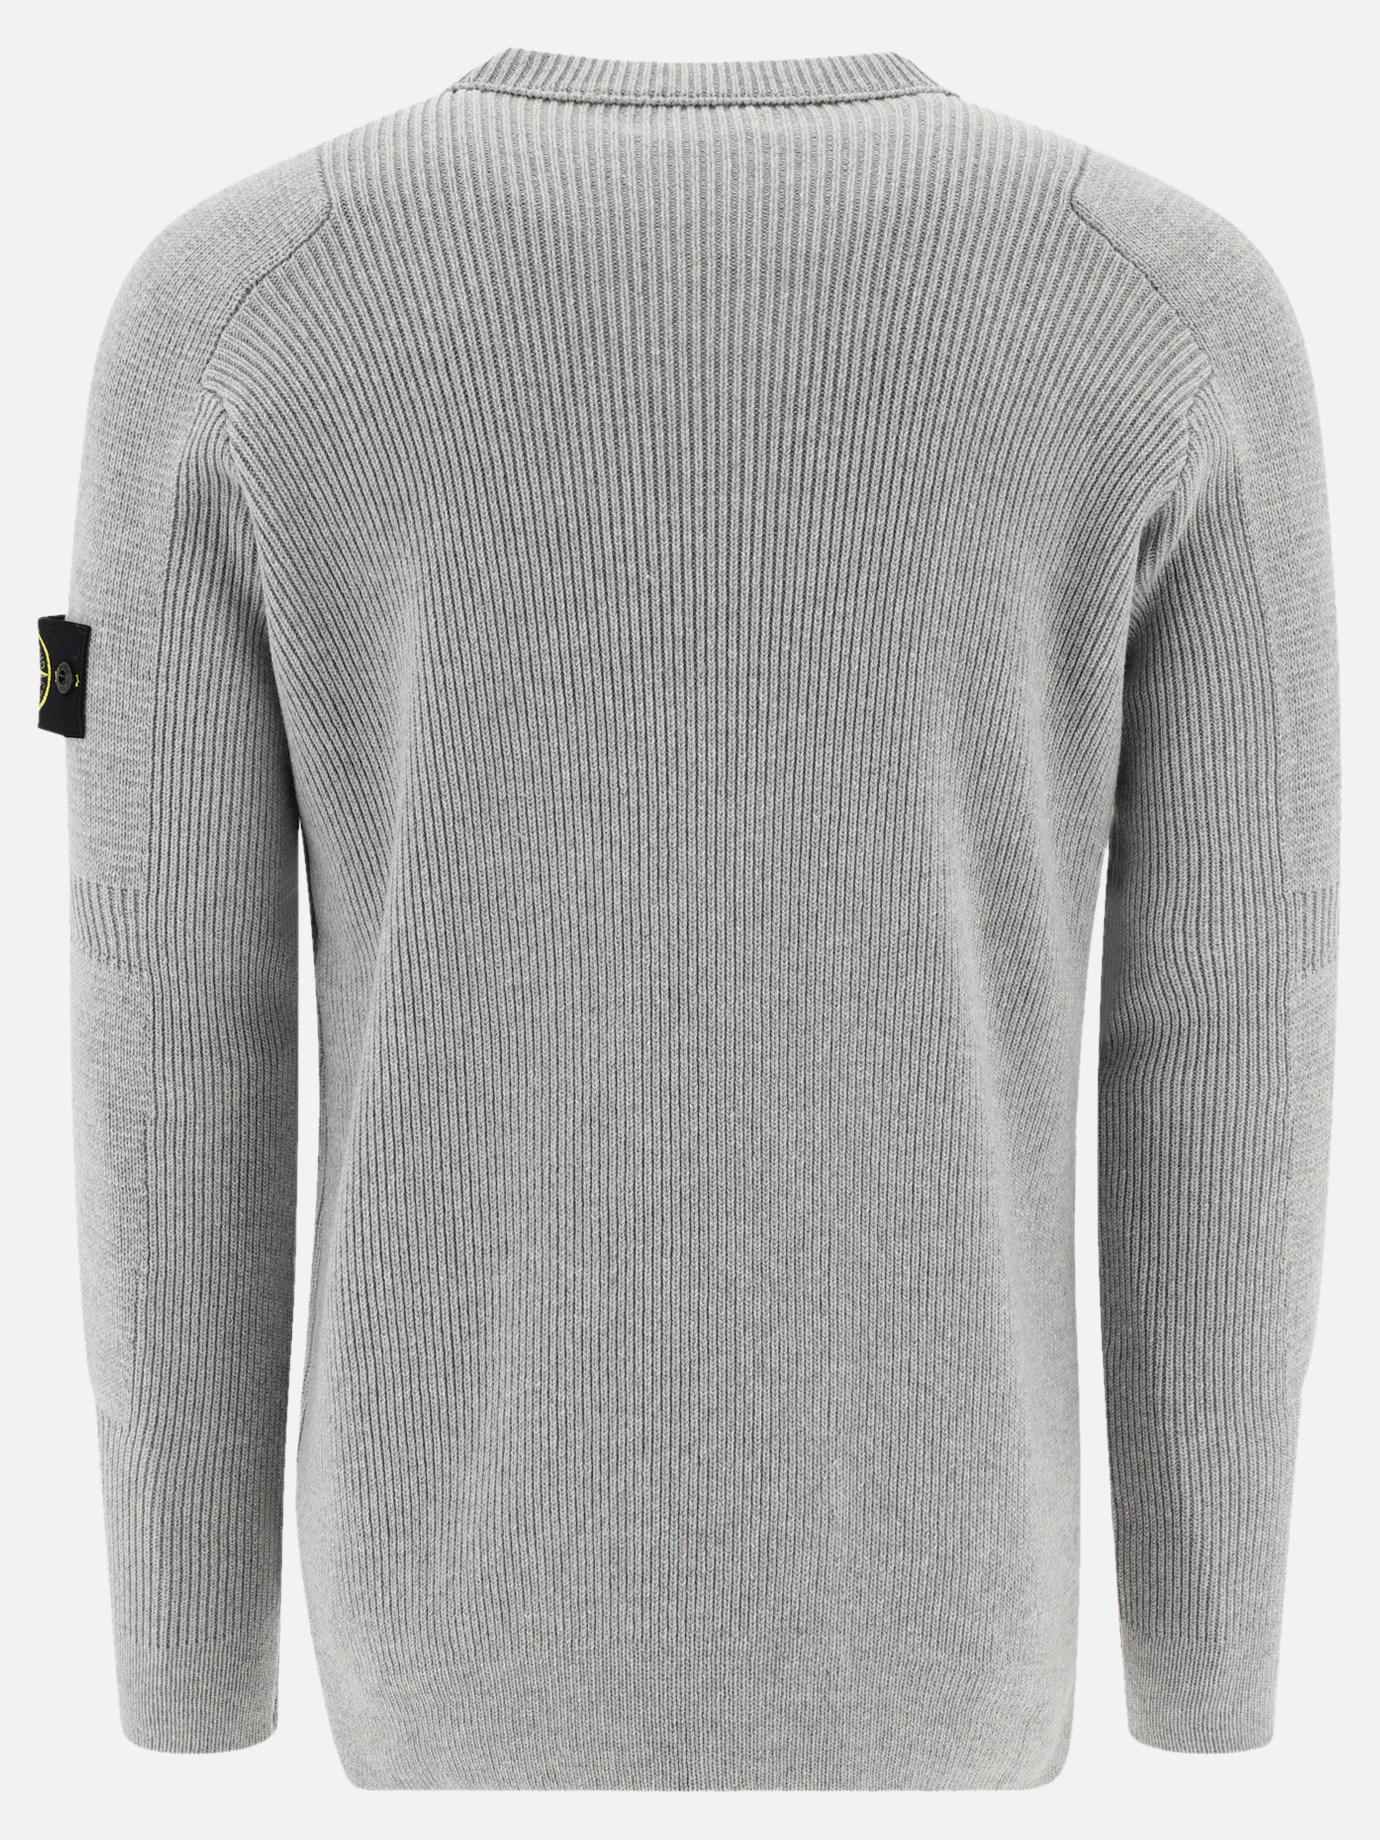  Compass  sweater by Stone Island